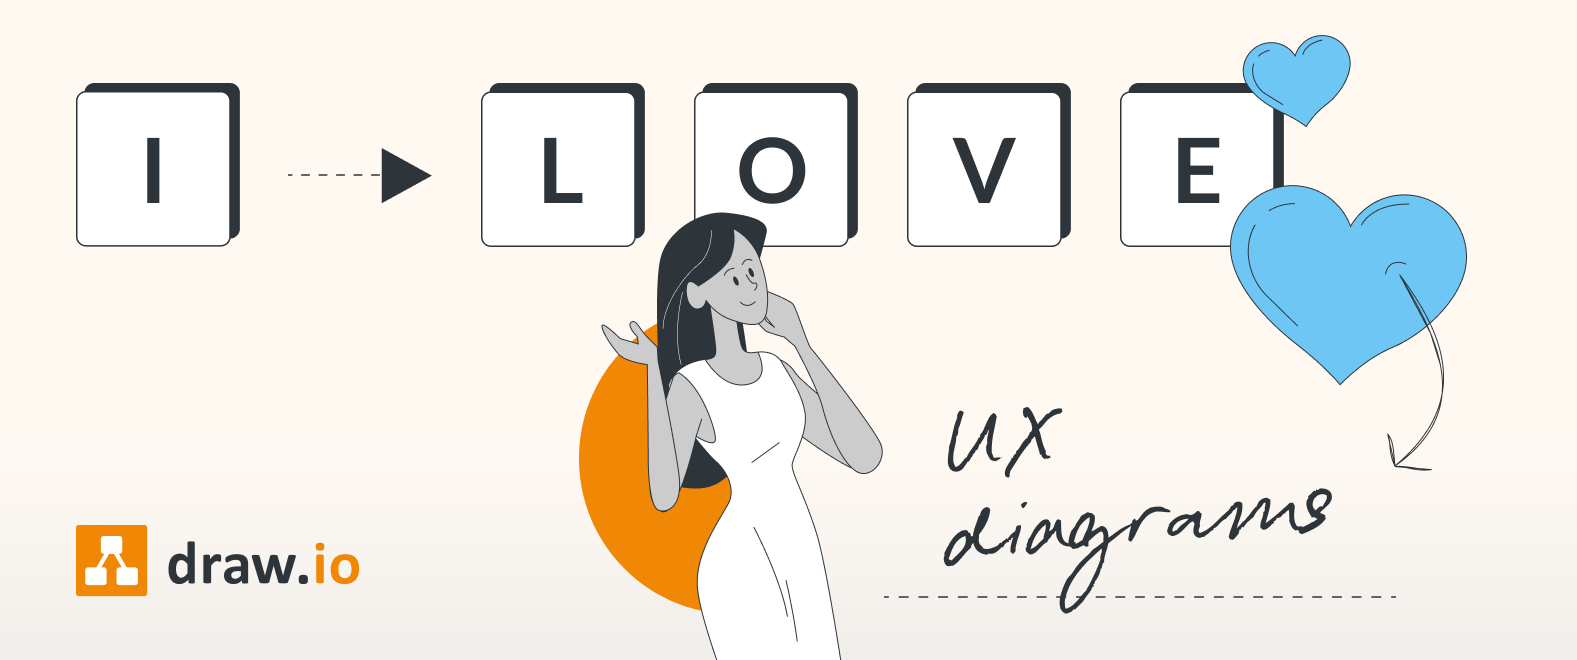 Romance comes to diagramming - introducing draw.io dating - draw.io